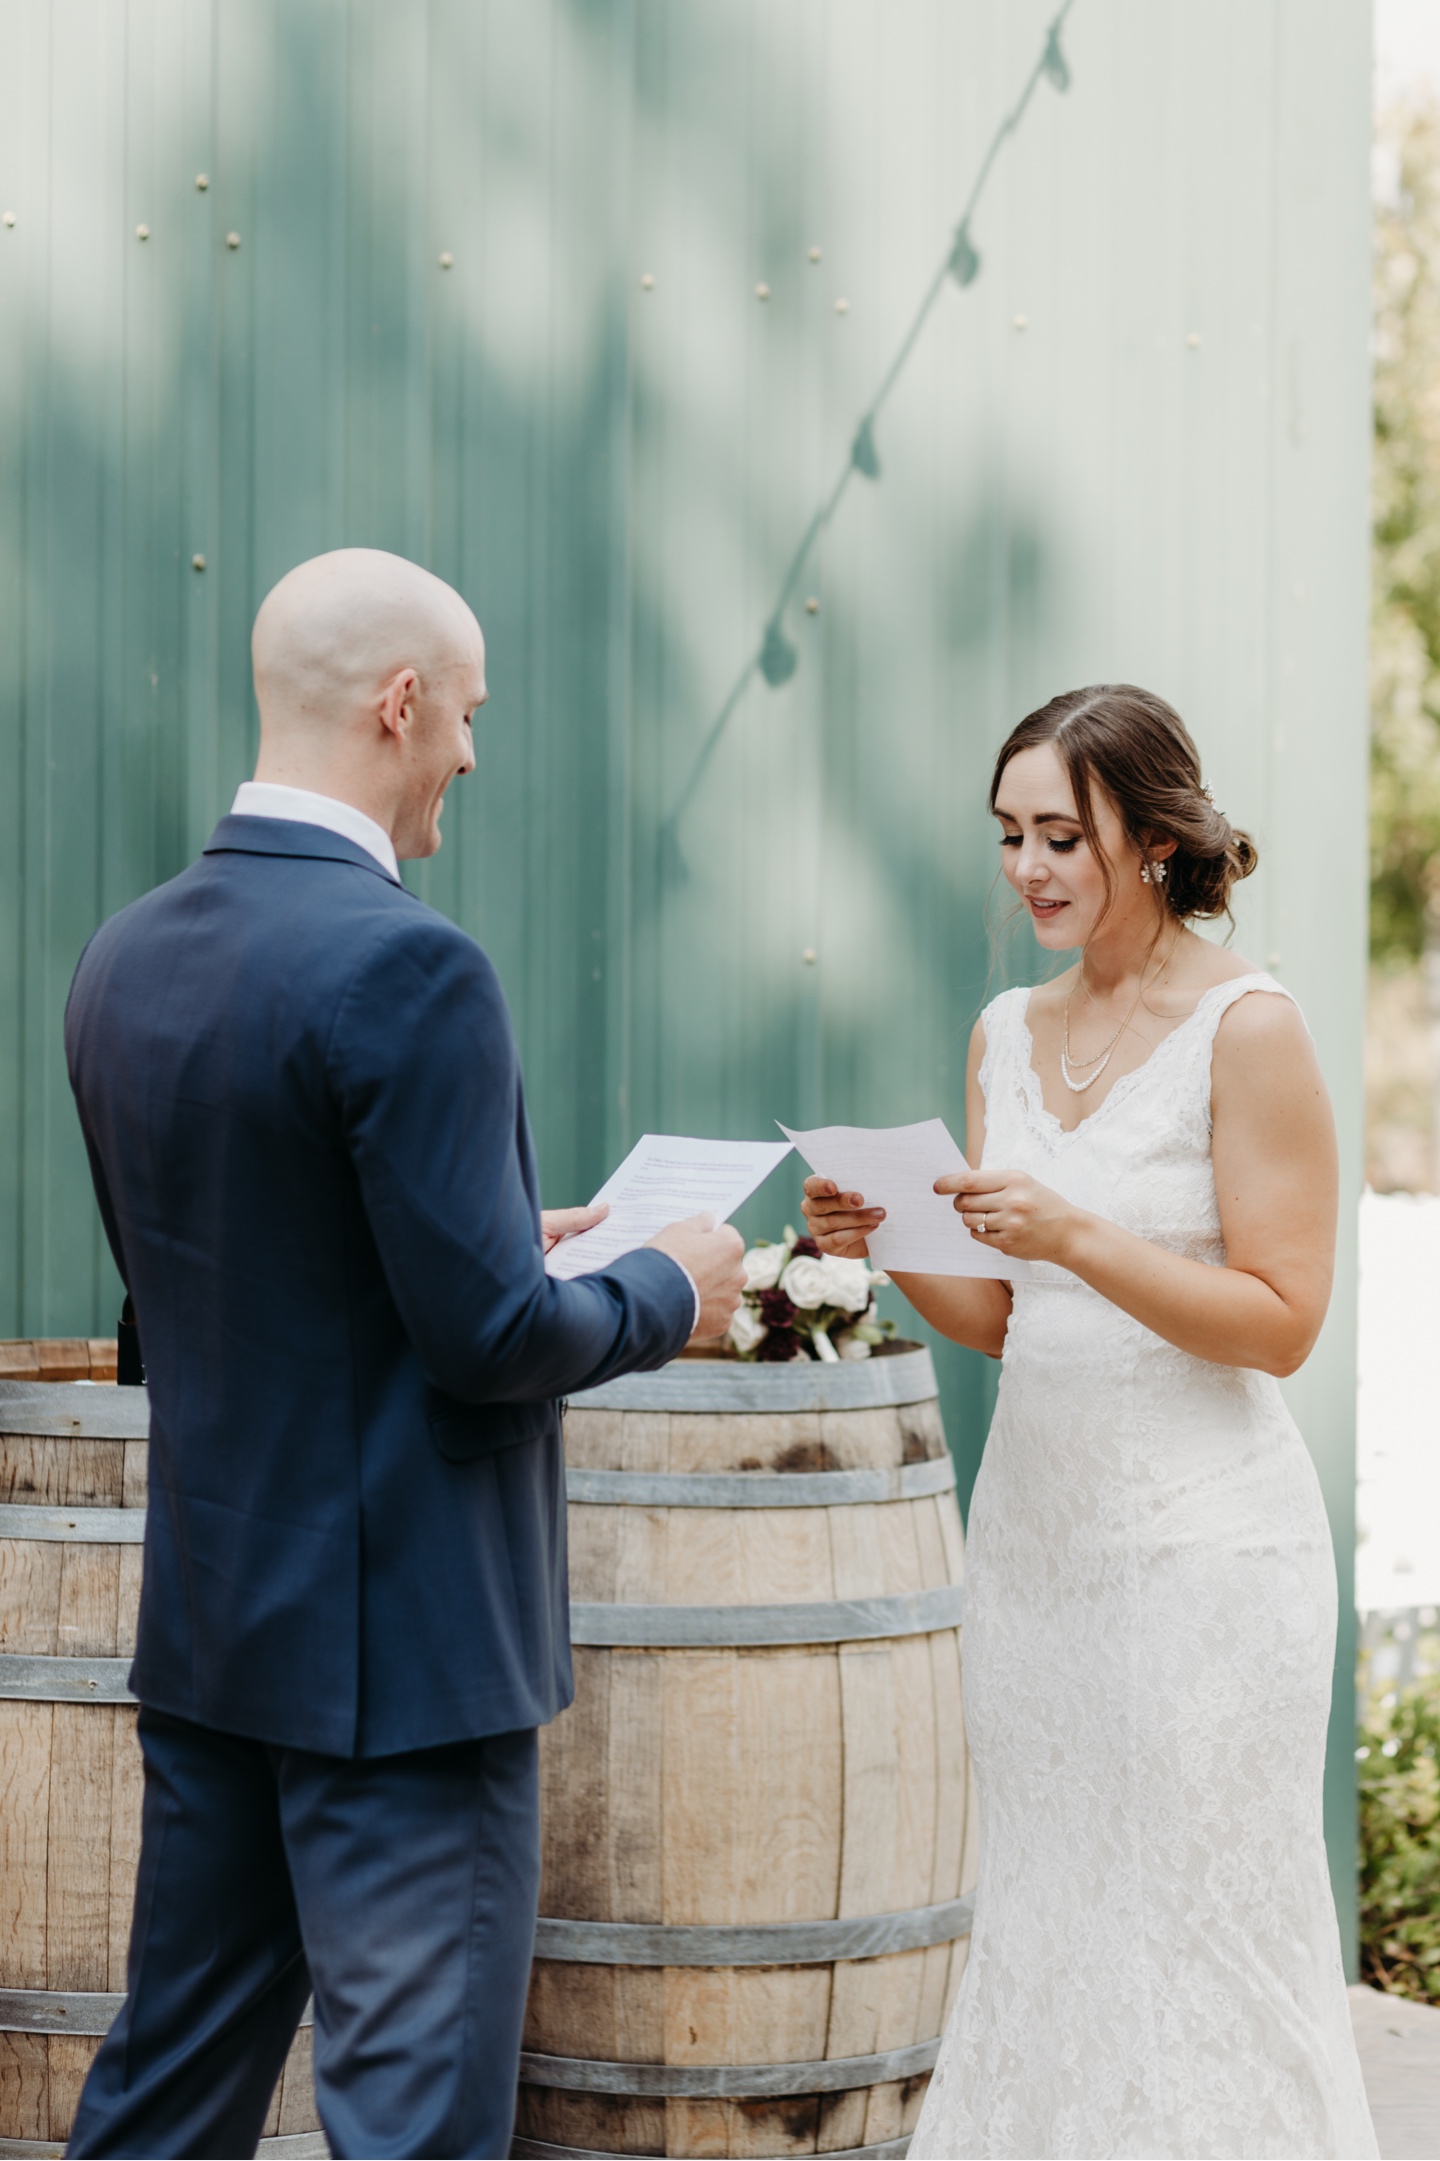 Bride and groom read letters they've written to each other before their wedding at Julietta winery. Captured by Liz Koston, Wedding photography Sacramento.